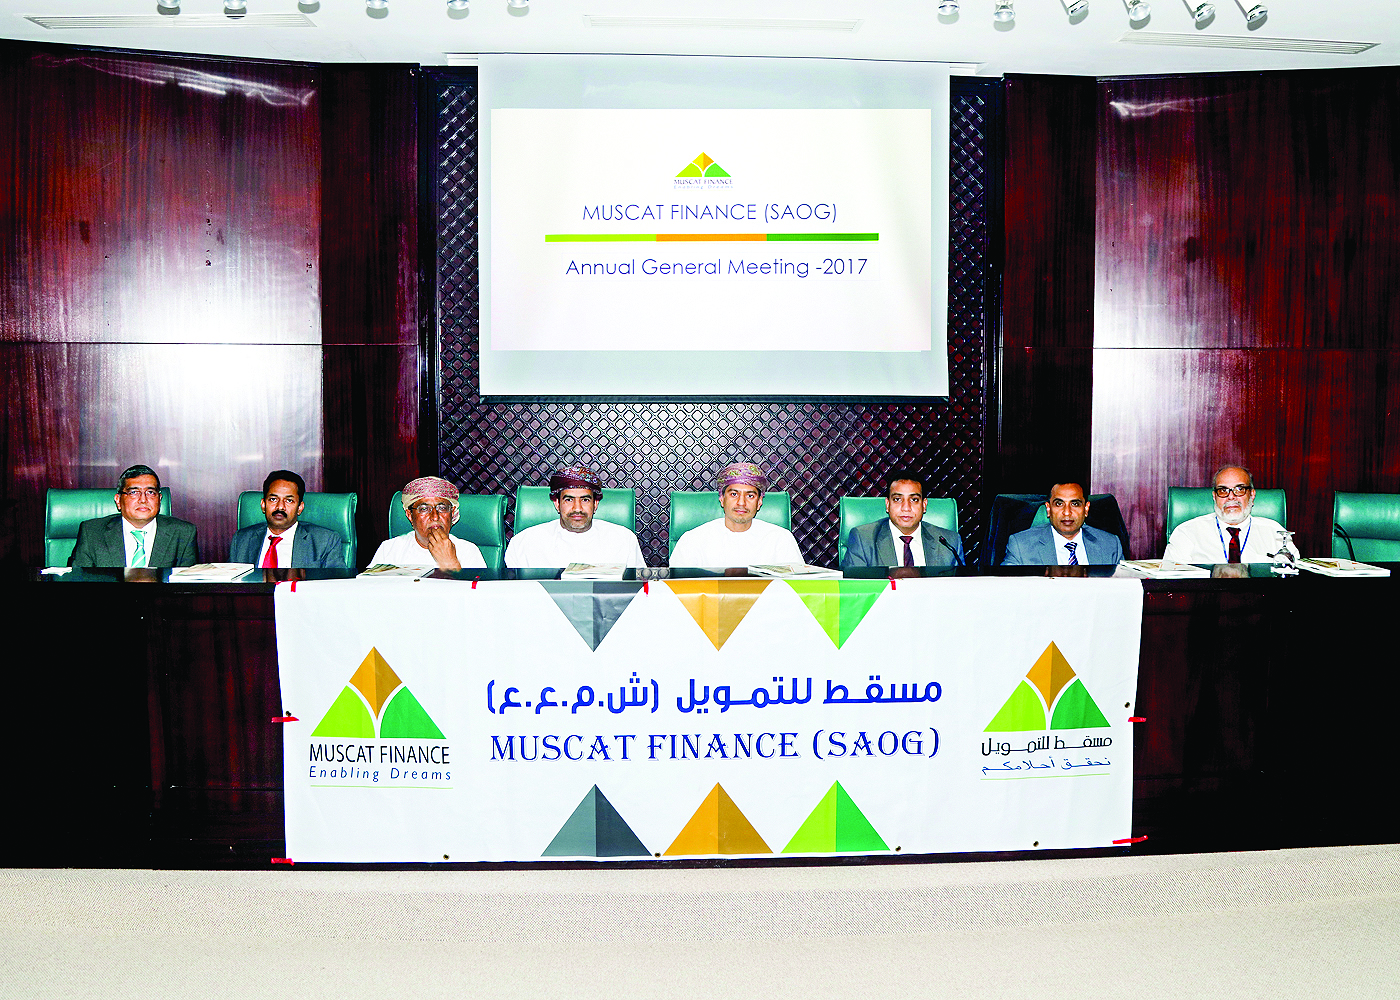 Muscat Finance shareholders approve dividend proposal